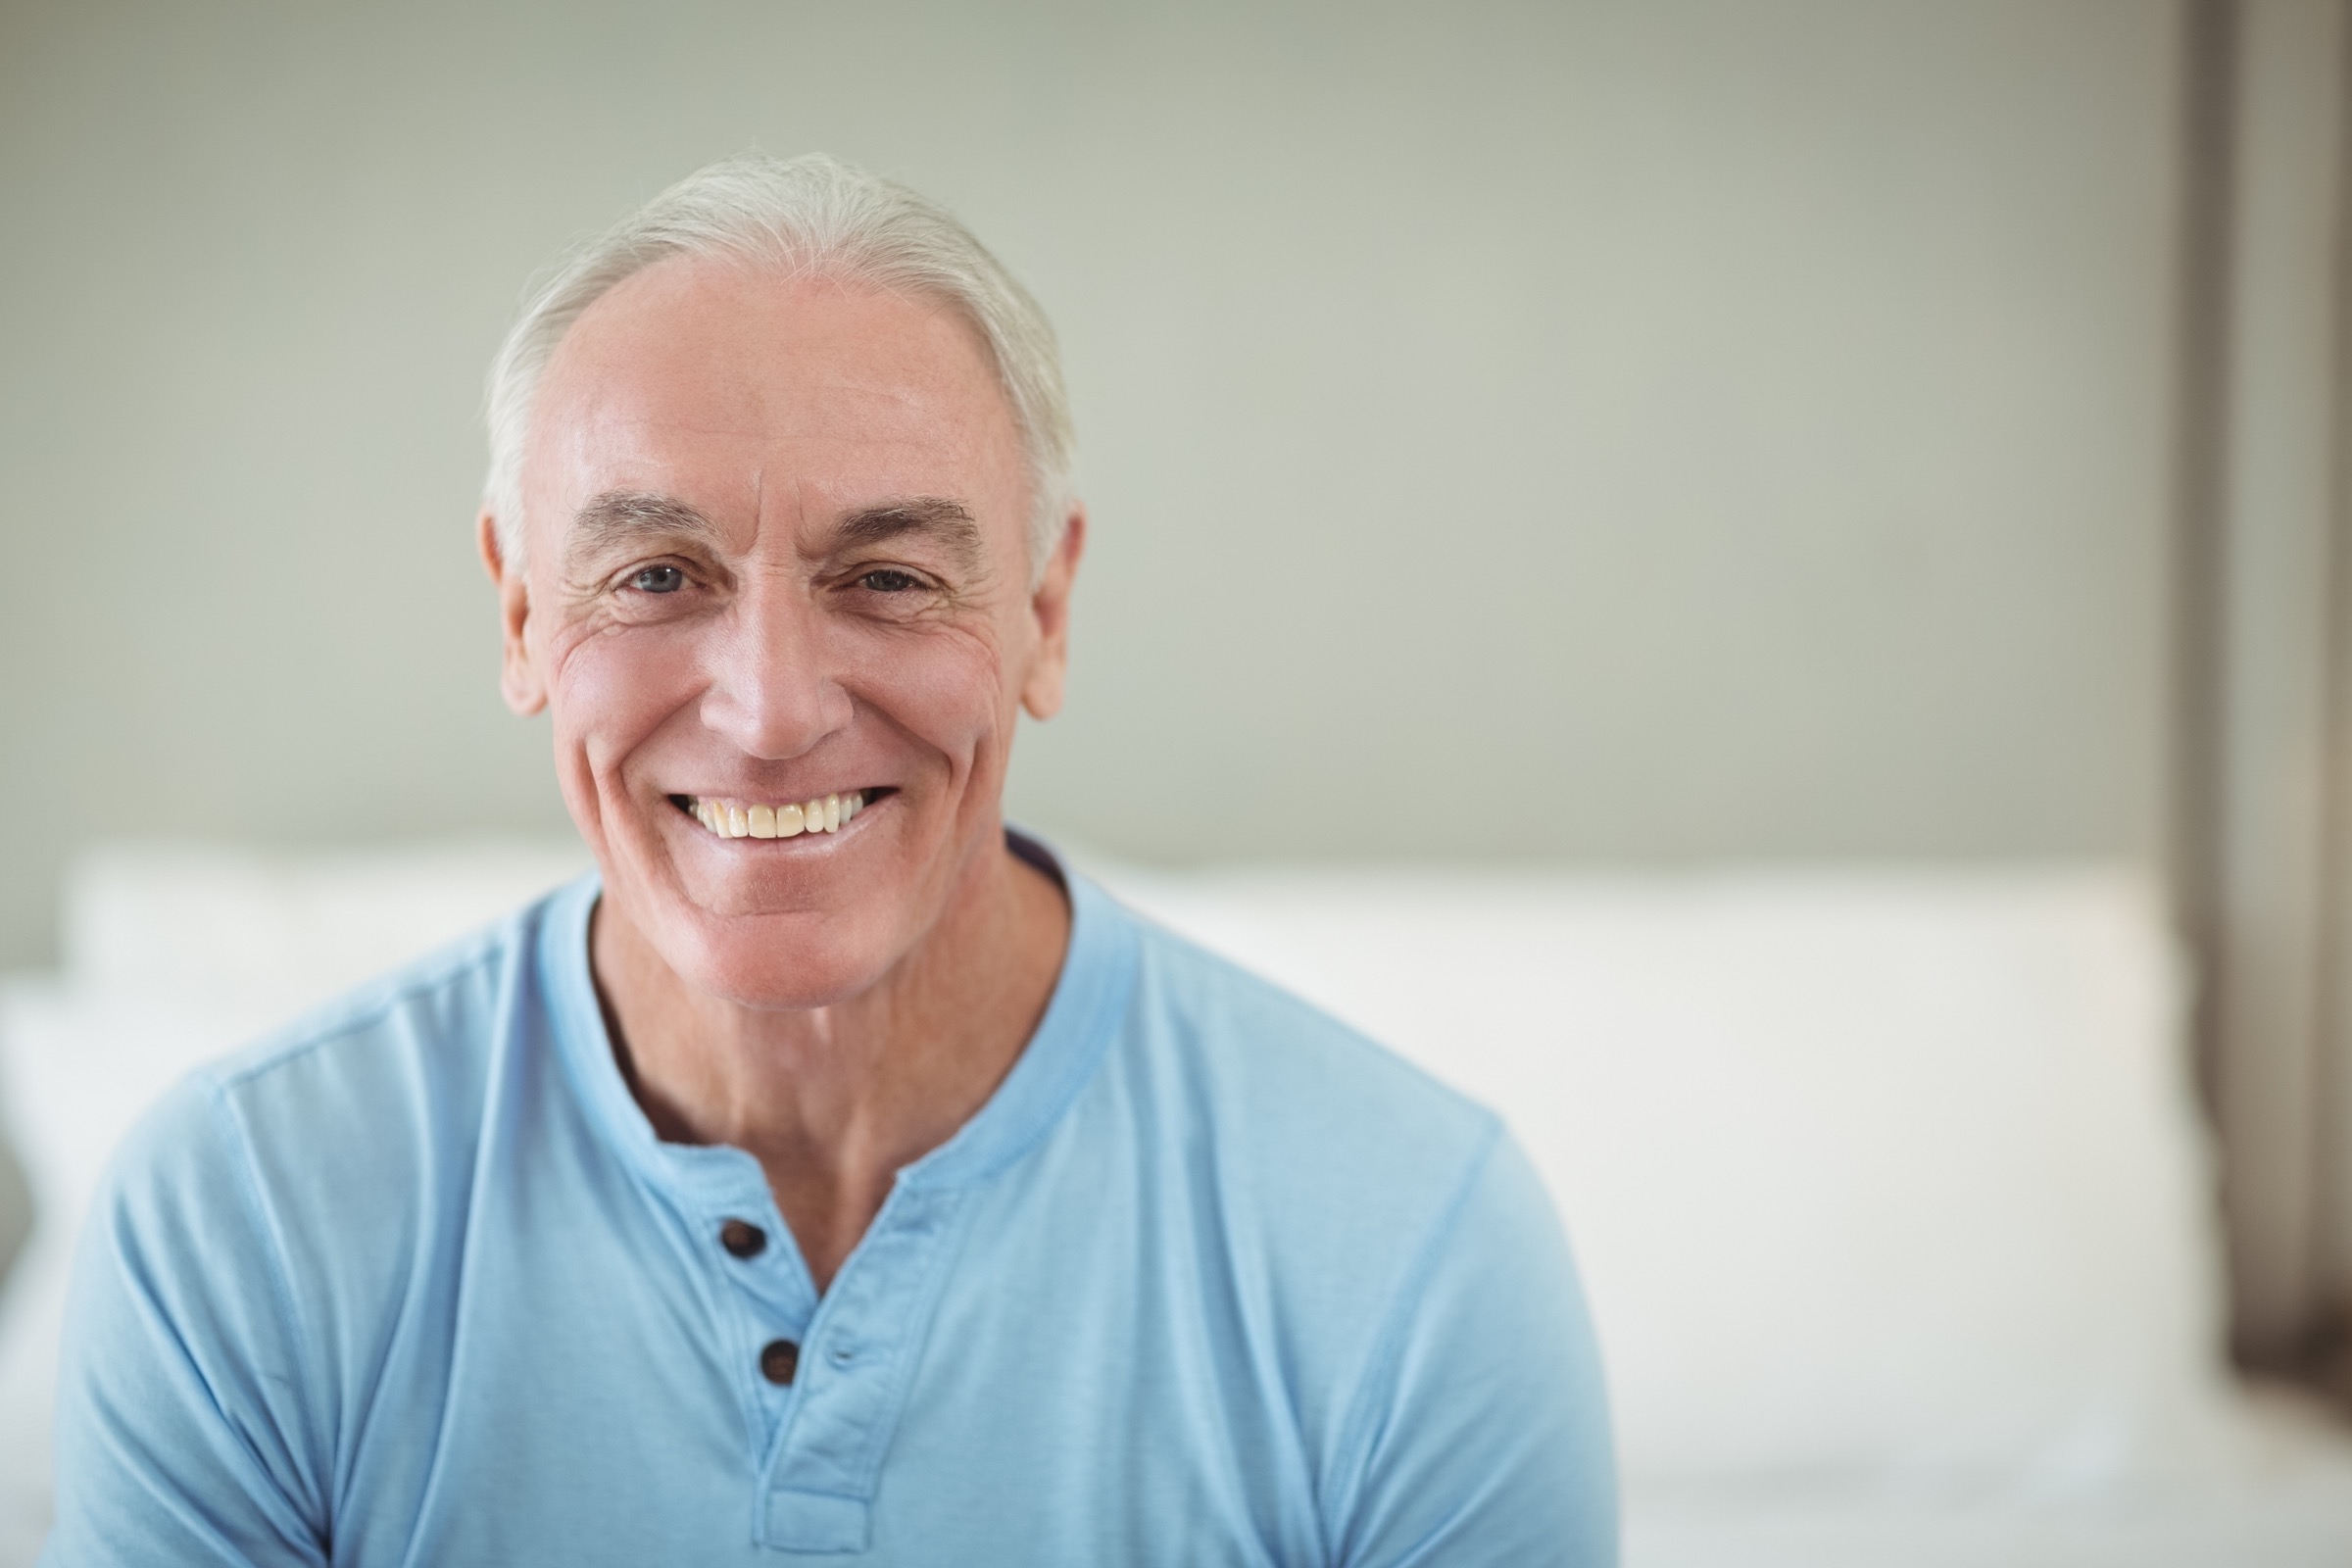 An older man smiling while sat on his bed